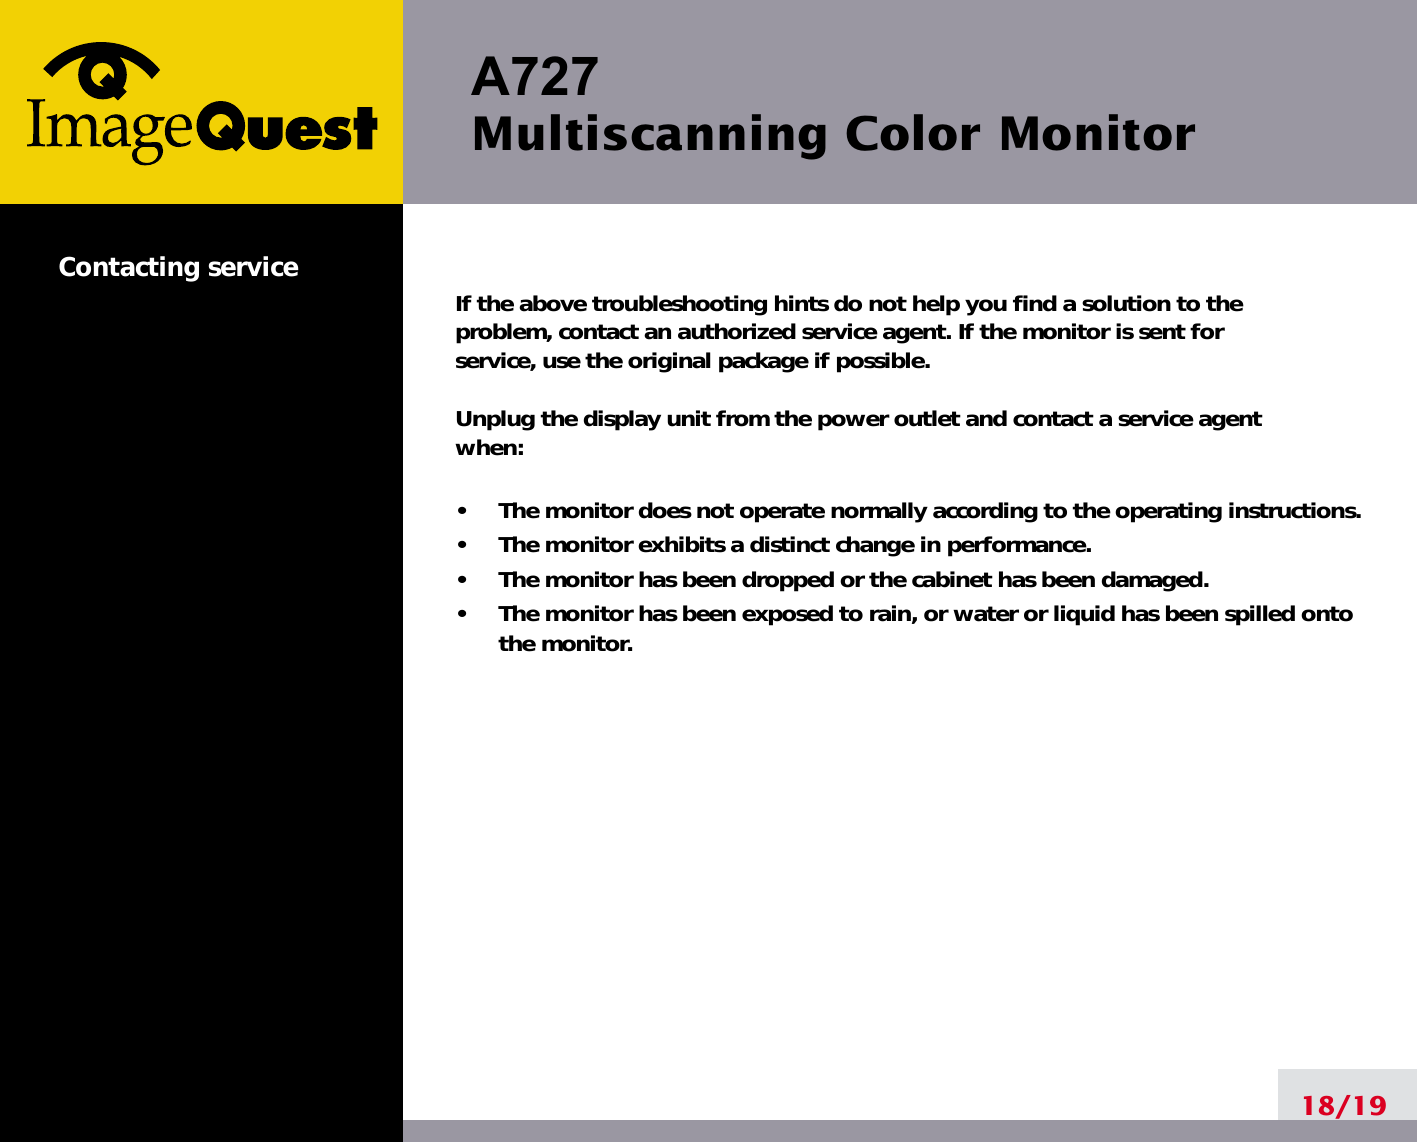 A727 Multiscanning Color Monitor18/19Contacting service If the above troubleshooting hints do not help you find a solution to the problem, contact an authorized service agent. If the monitor is sent for service, use the original package if possible.Unplug the display unit from the power outlet and contact a service agent when:•     The monitor does not operate normally according to the operating instructions.•     The monitor exhibits a distinct change in performance.•     The monitor has been dropped or the cabinet has been damaged.•     The monitor has been exposed to rain, or water or liquid has been spilled ontothe monitor.